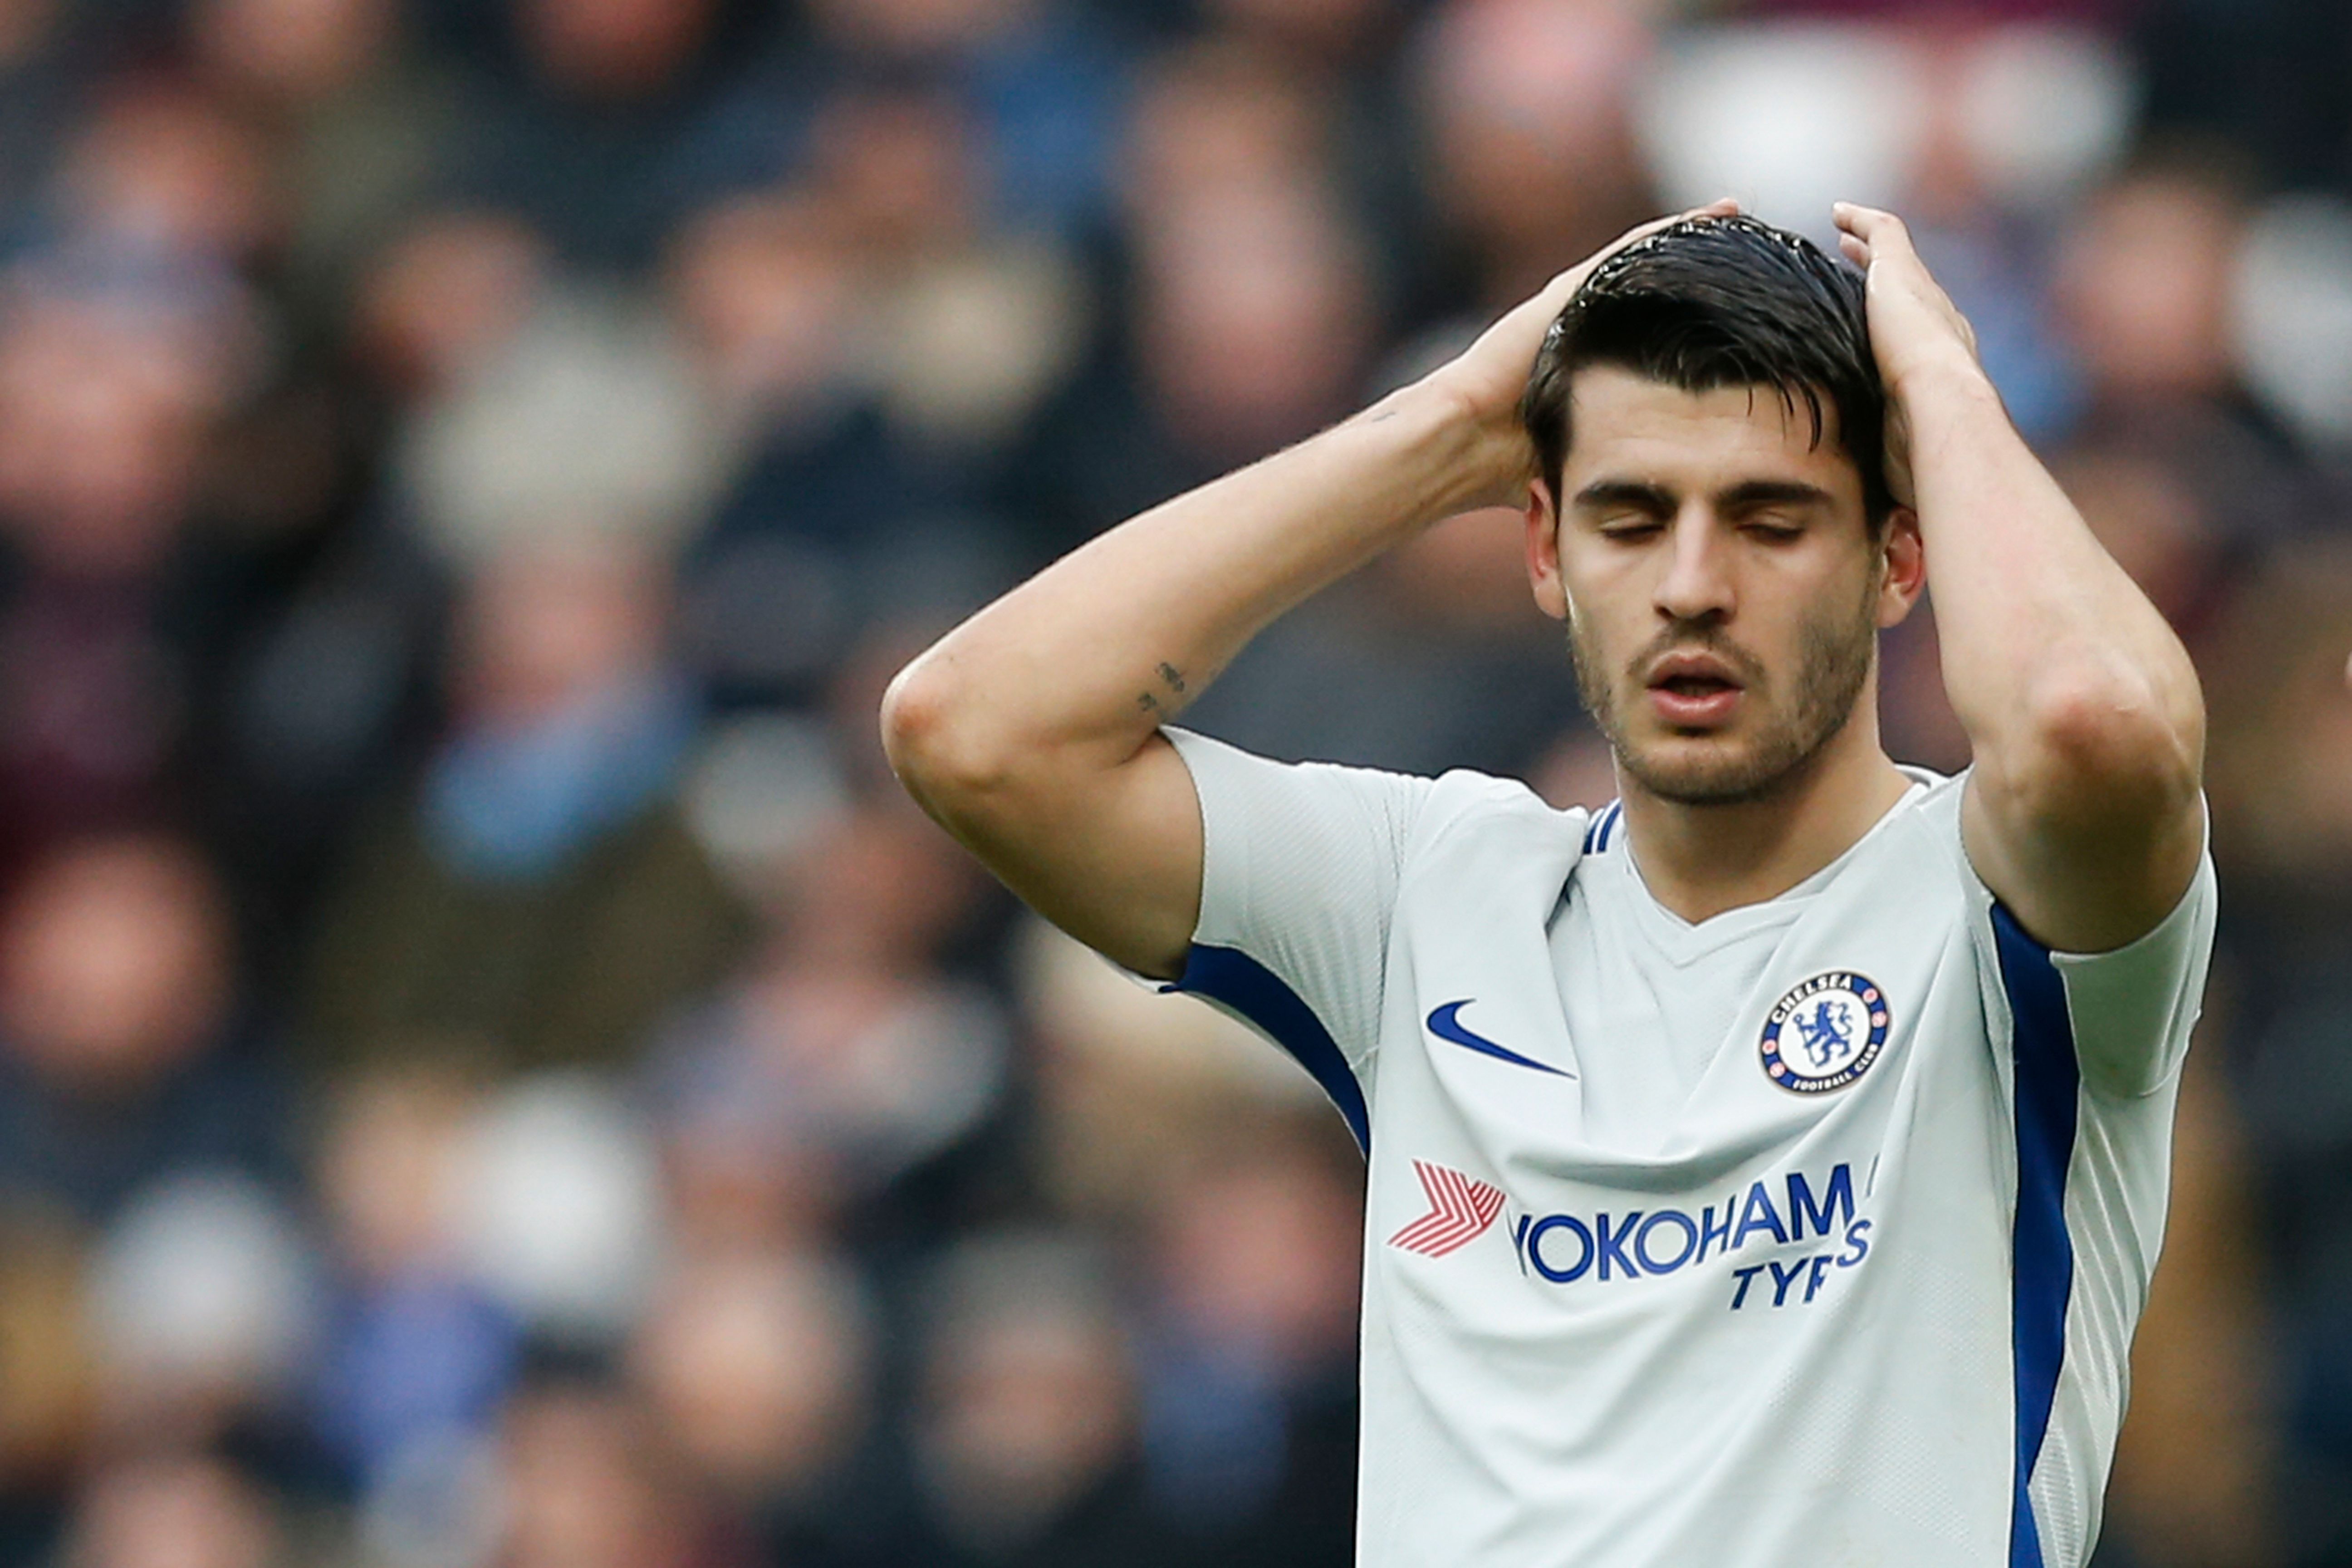 Chelsea's Spanish striker Alvaro Morata reacts after missing a good chance during the English Premier League football match between West Ham United and Chelsea at The London Stadium, in east London on December 9, 2017. / AFP PHOTO / Ian KINGTON / RESTRICTED TO EDITORIAL USE. No use with unauthorized audio, video, data, fixture lists, club/league logos or 'live' services. Online in-match use limited to 75 images, no video emulation. No use in betting, games or single club/league/player publications.  /